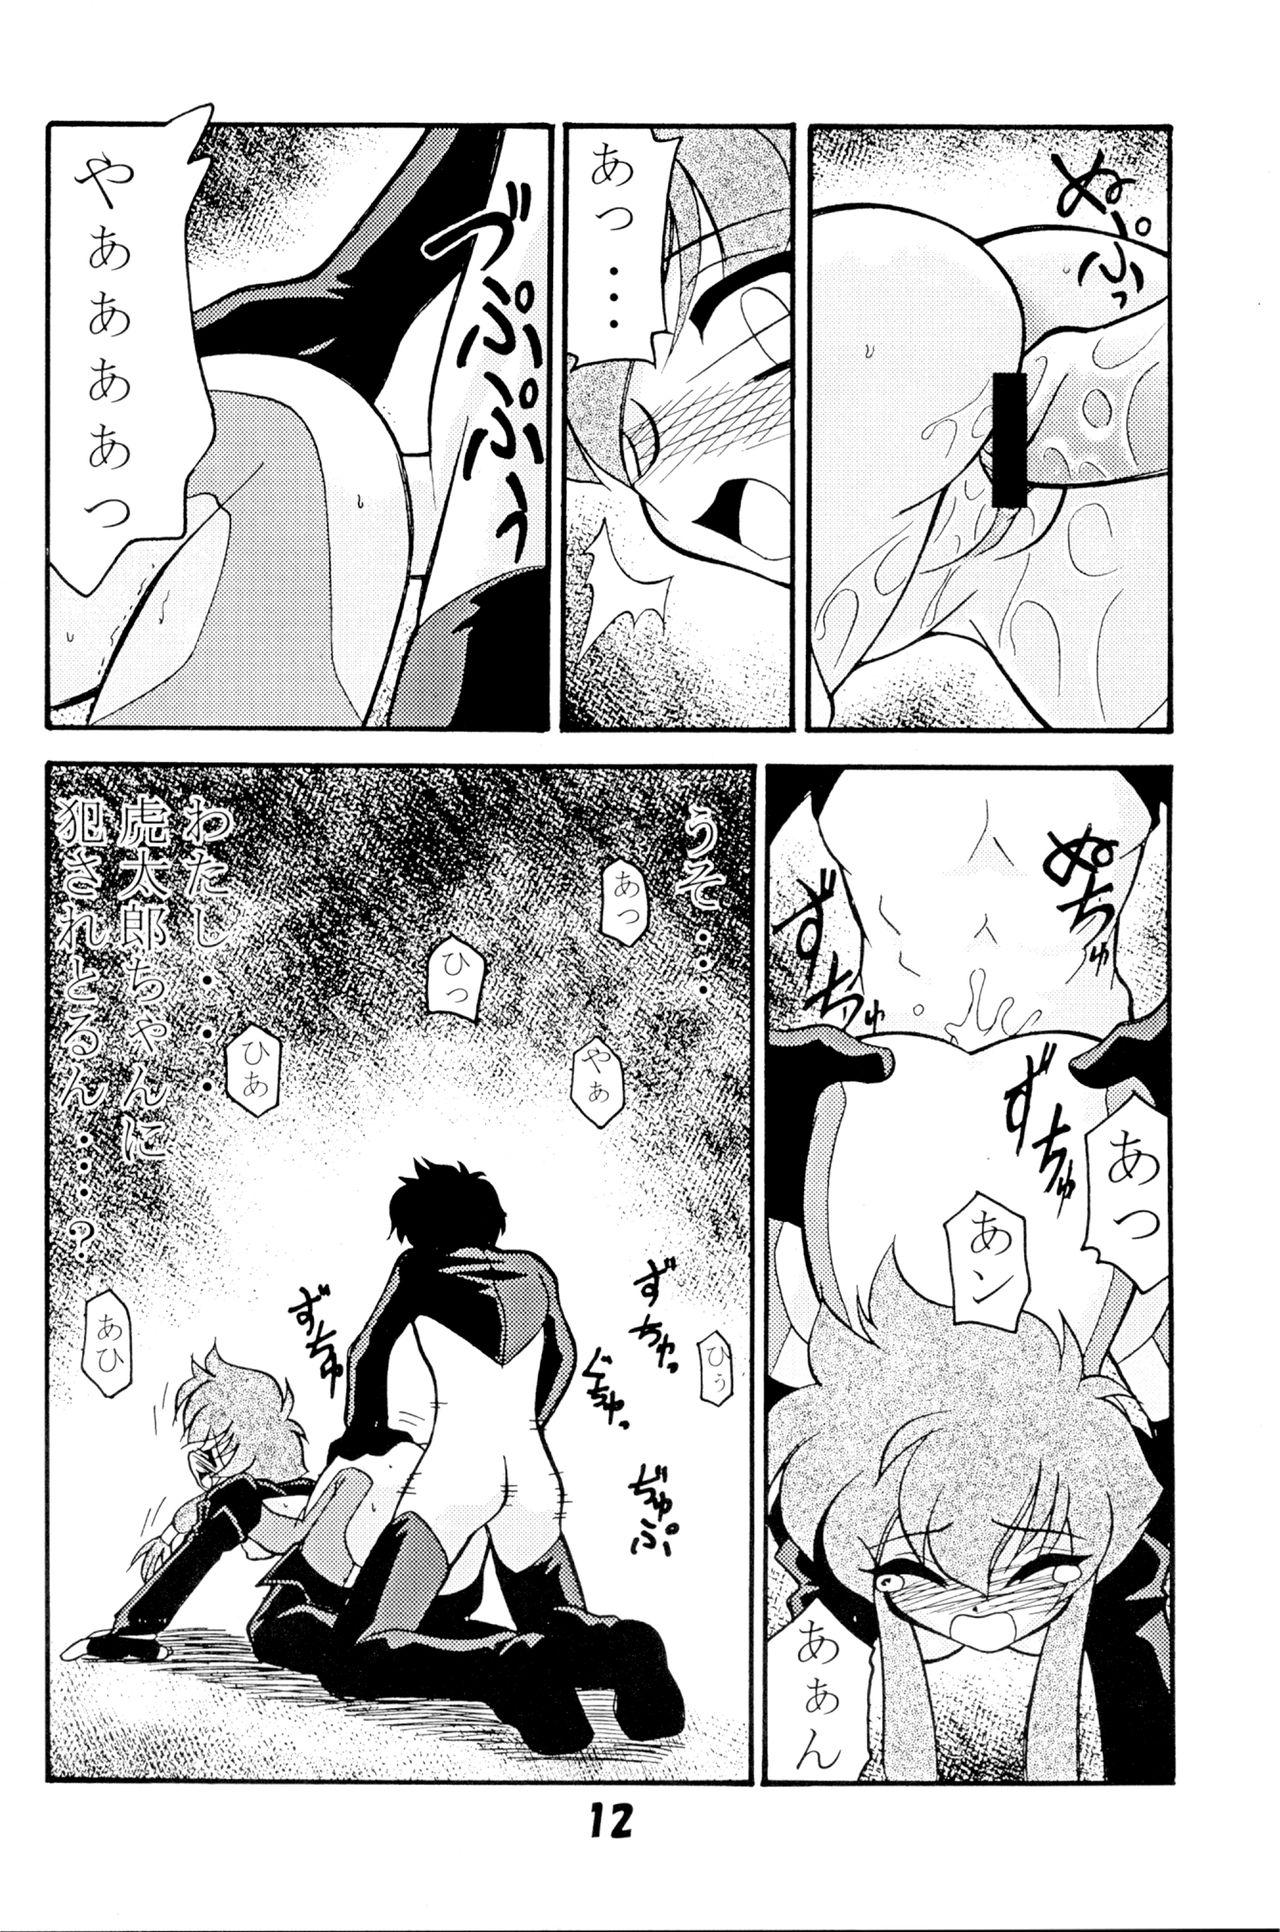 Soloboy VERSUS - Magic knight rayearth Angelic layer Street Fuck - Page 11